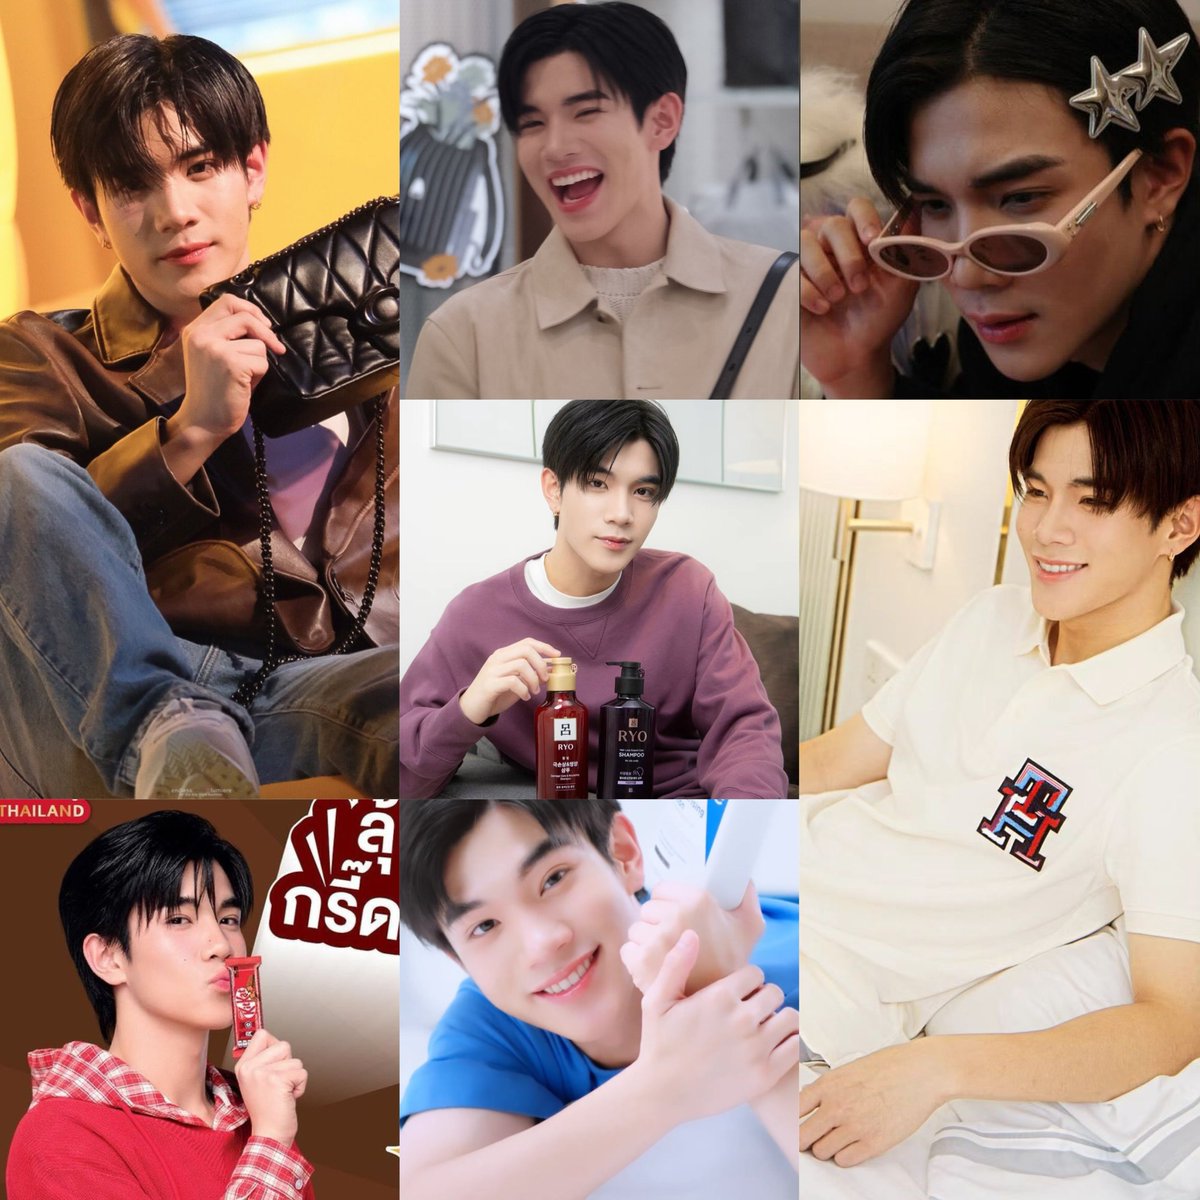 Within these day we are so busy with FotFot Brands

Coach
Tods
RYO
Gentle Monster 
Tommyhilfiger 
KitKat
CeraVe

🥰🥰🥰

Let’s hype more!!!!

#Fourthnattawat #โฟร์ทณัฐวรรธน์